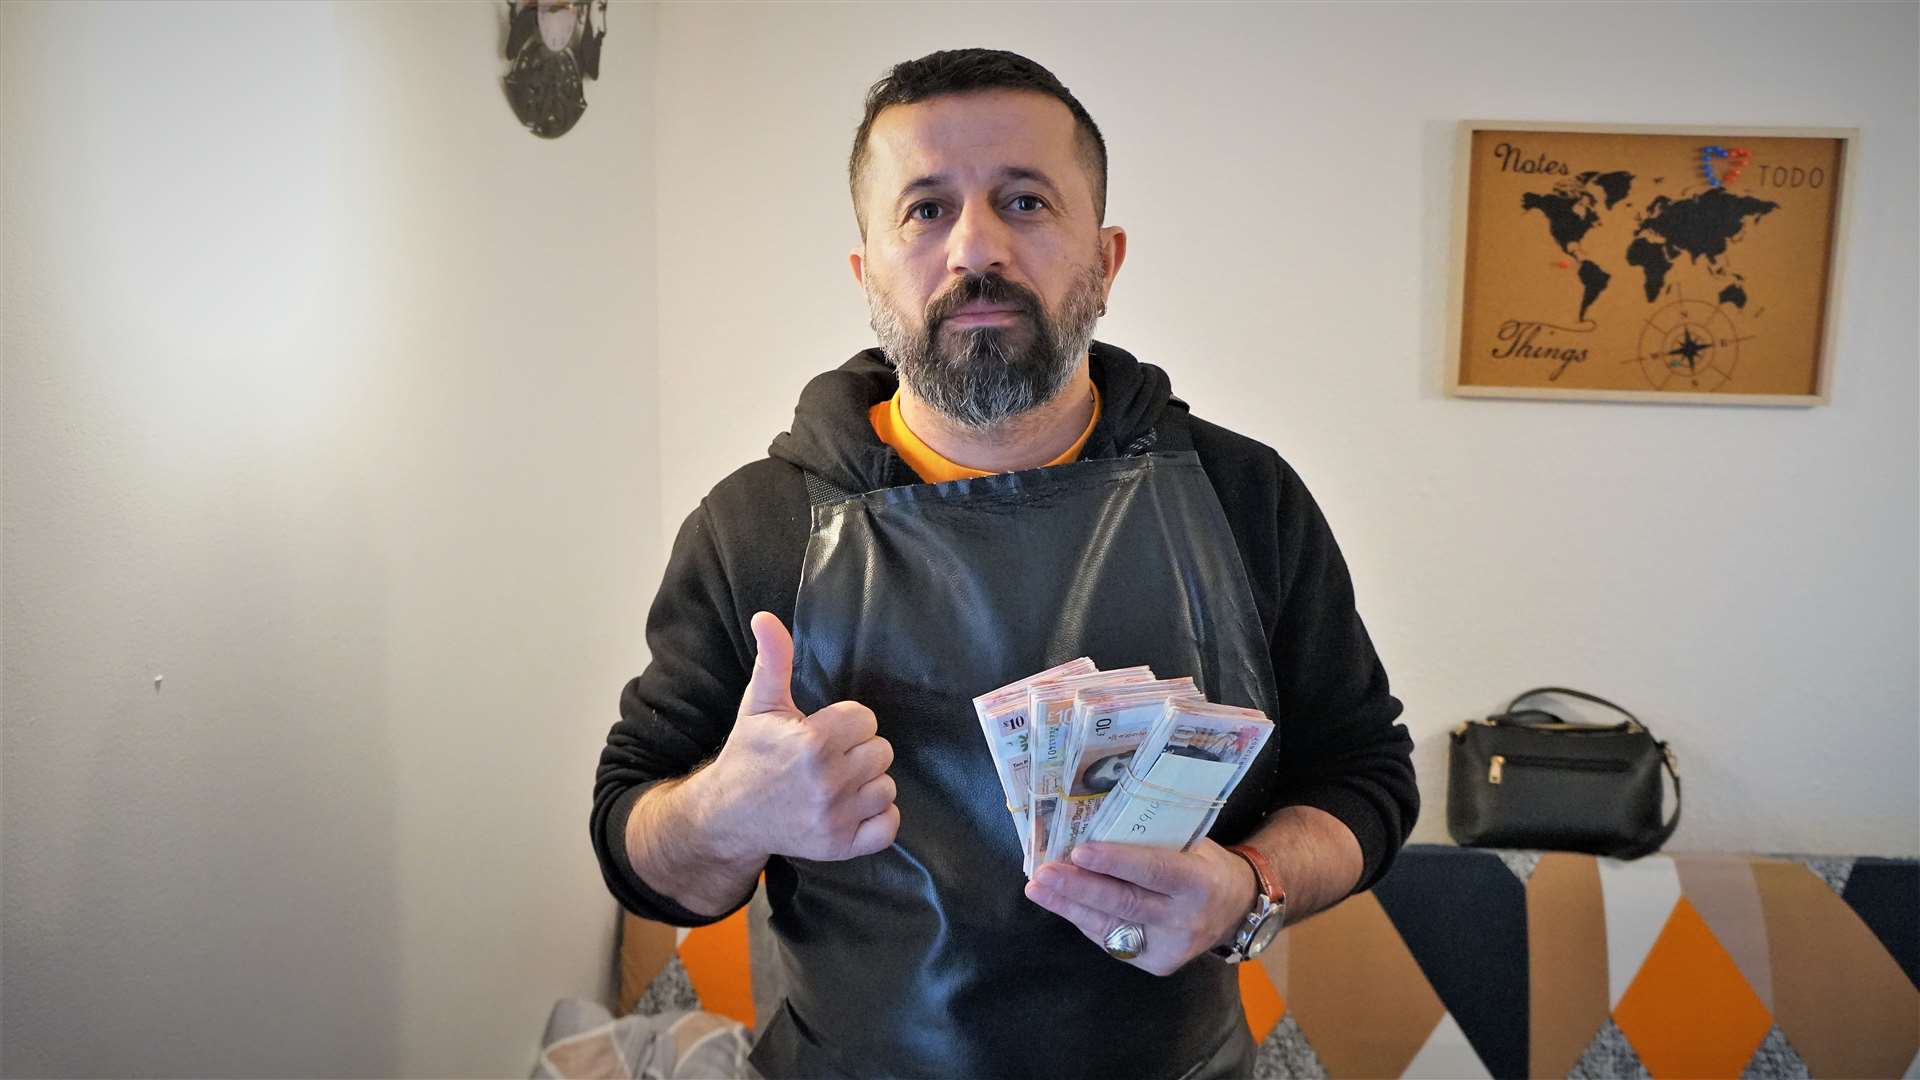 Ismail Dogrulmaz, who runs Derya's Turkish Barber shop in Thurso, with some of the money he raised for the earthquake victims. He will travel to Turkey with his wife and distribute the donated money, along with some of their own, to families affected by the disaster. Picture: DGS